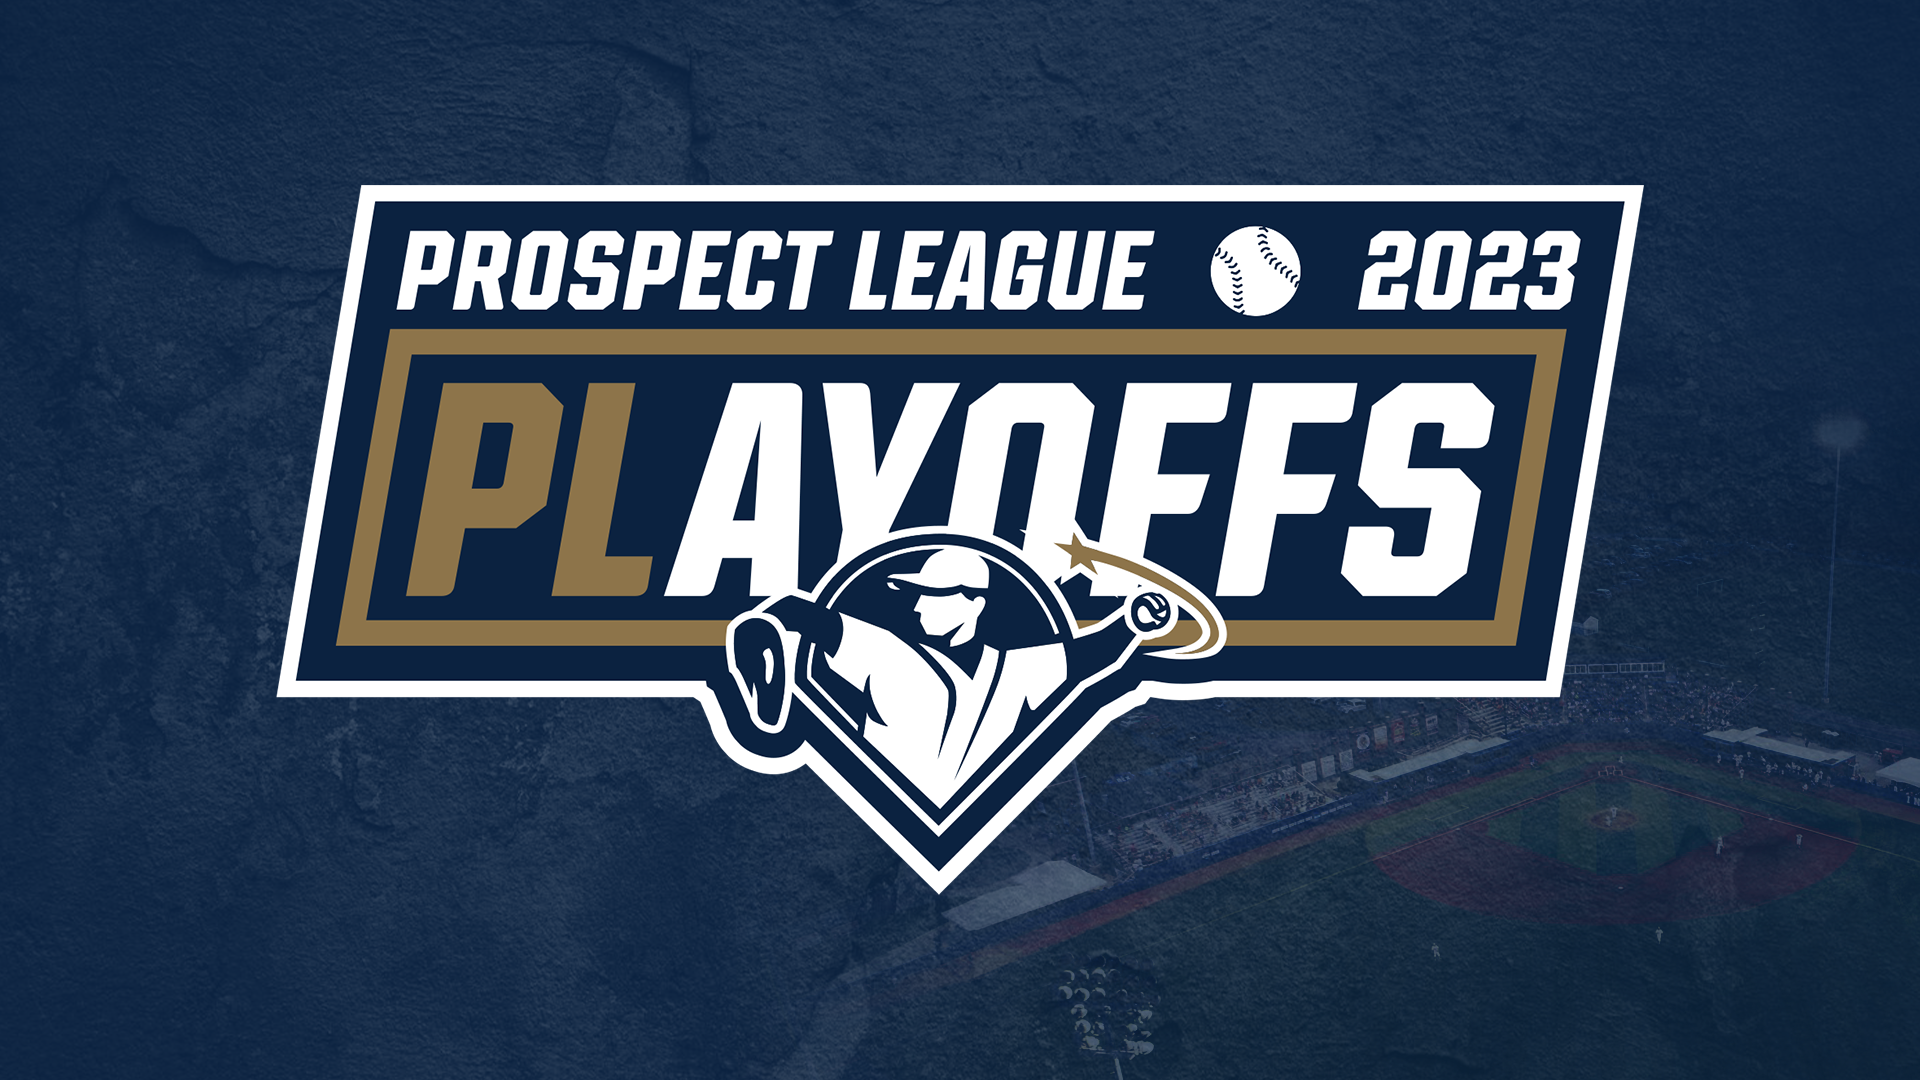 2023 Playoffs Conclude Sunday!